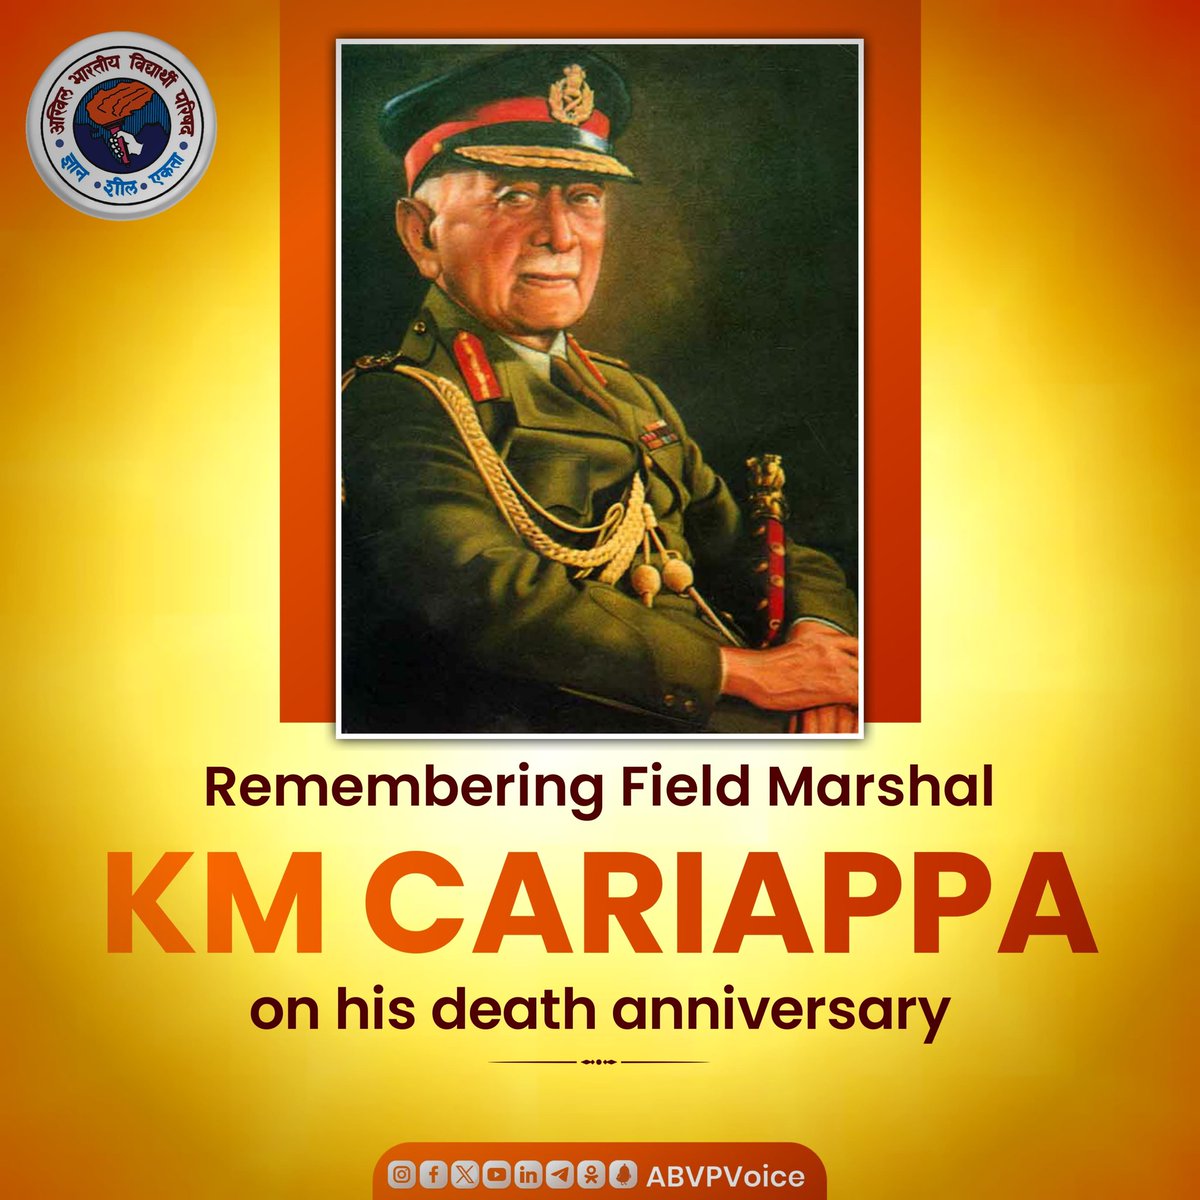 ABVP salutes the first Commander-in-Chief of the Bharatiya Army Field Marshal KM Cariappa on his death anniversary, a towering figure whose leadership shaped the legacy of the Bharatiya Army. His courage, strategic brilliance, and unwavering commitment to the nation continue to…